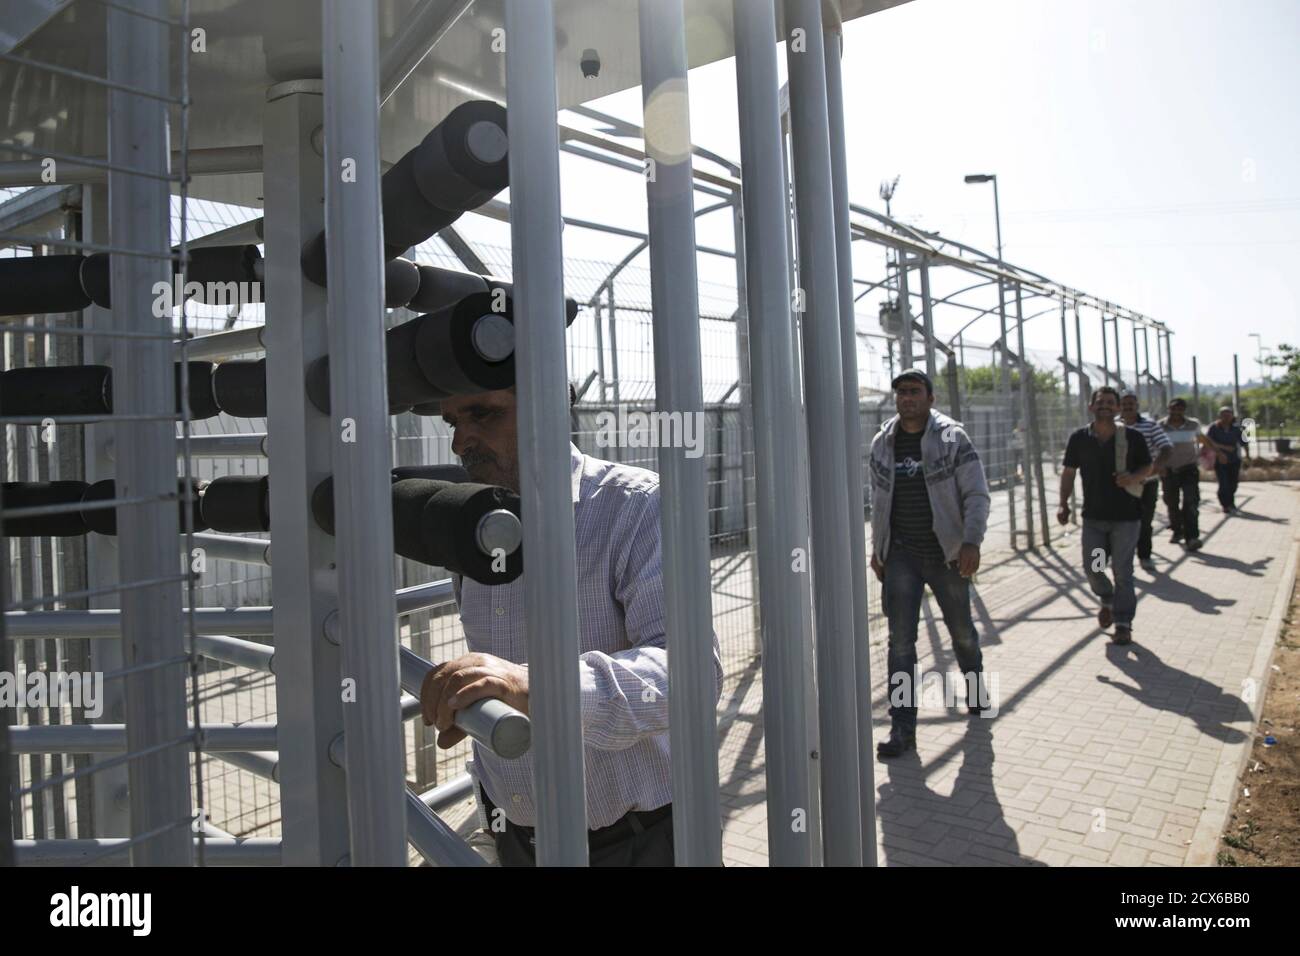 Palestinian labourers with permits to work in Israel walk through a turnstile as they return to the West Bank at Israel's Eyal checkpoint near the West Bank town of Qalqilya May 20, 2015. Prime Minister Benjamin Netanyahu suspended on Wednesday new bus travel and checkpoint regulations for Palestinian labourers only hours after they were imposed to an outcry by critics accusing Israel of racial segregation. REUTERS/Baz Ratner Stock Photo